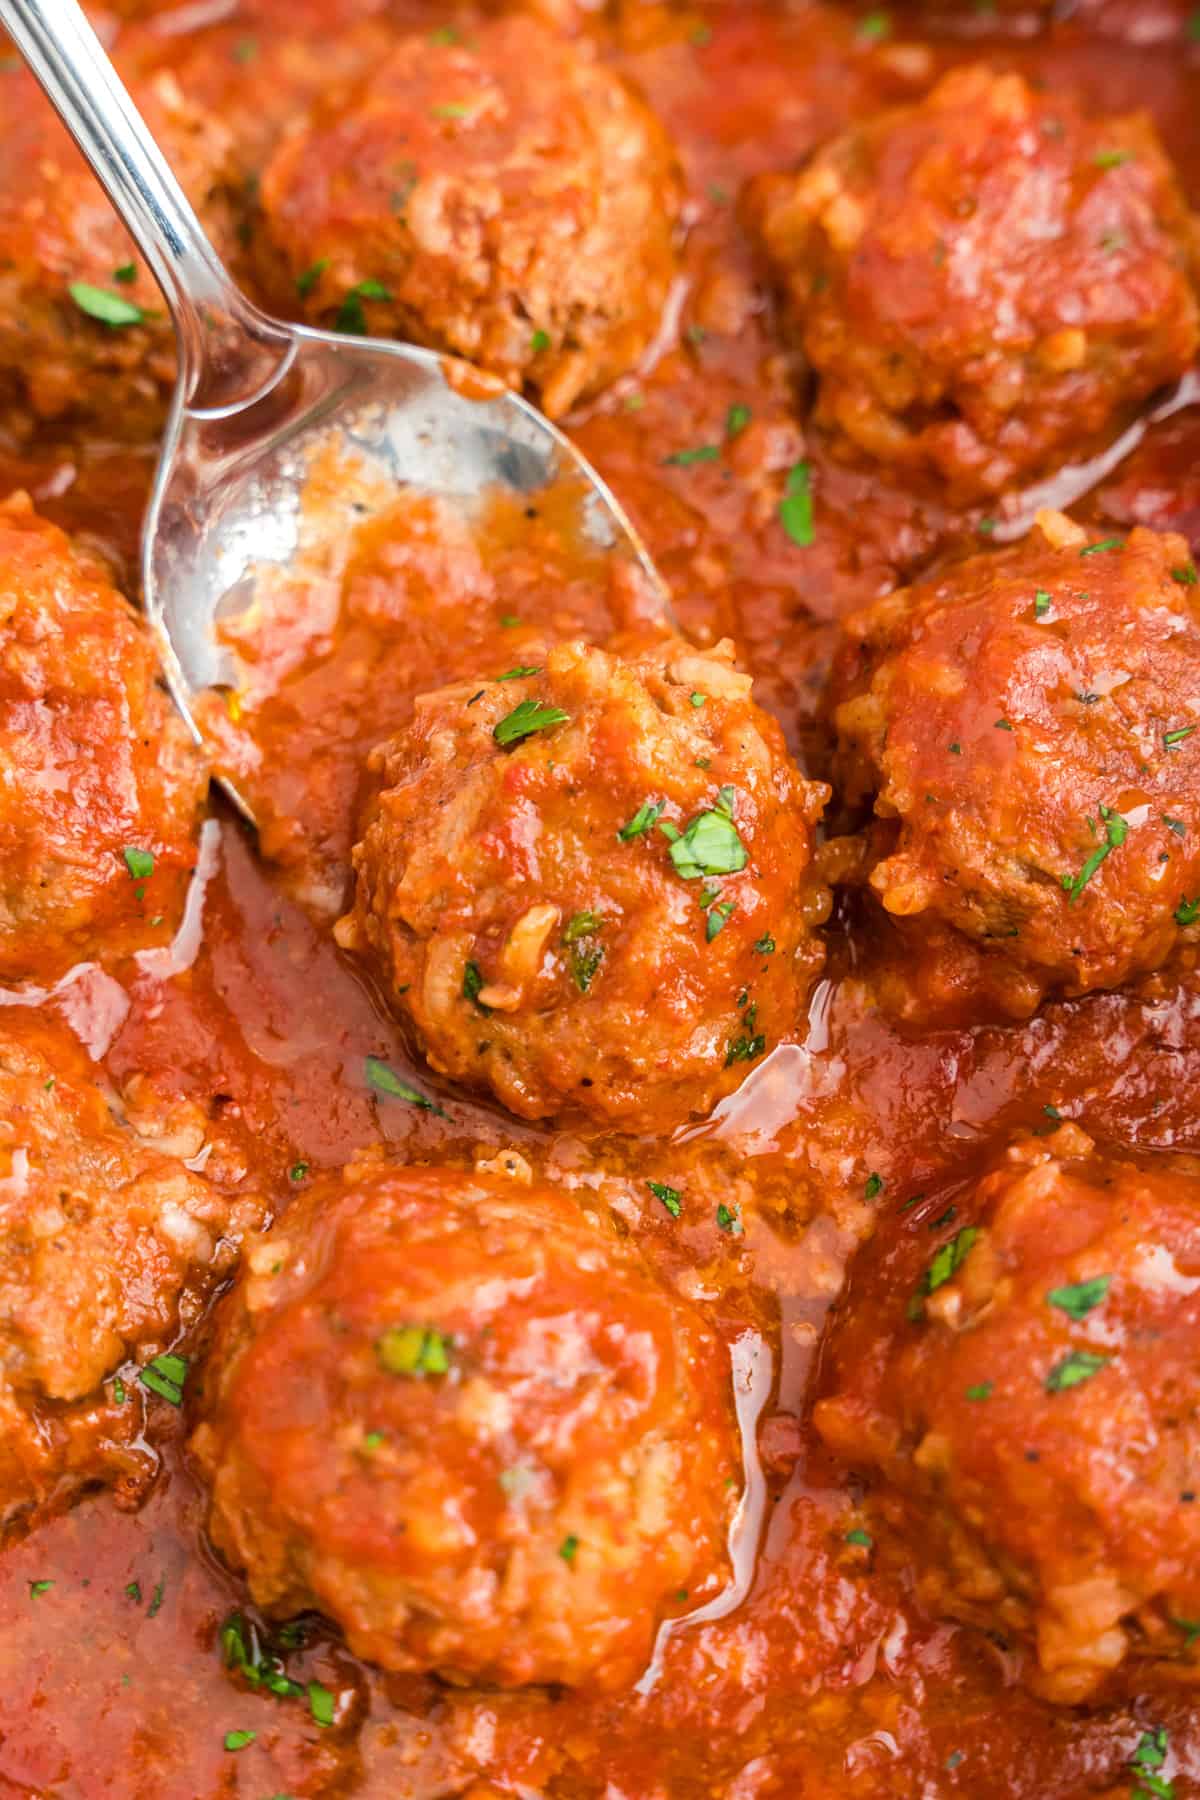 Spooning meatballs from pan